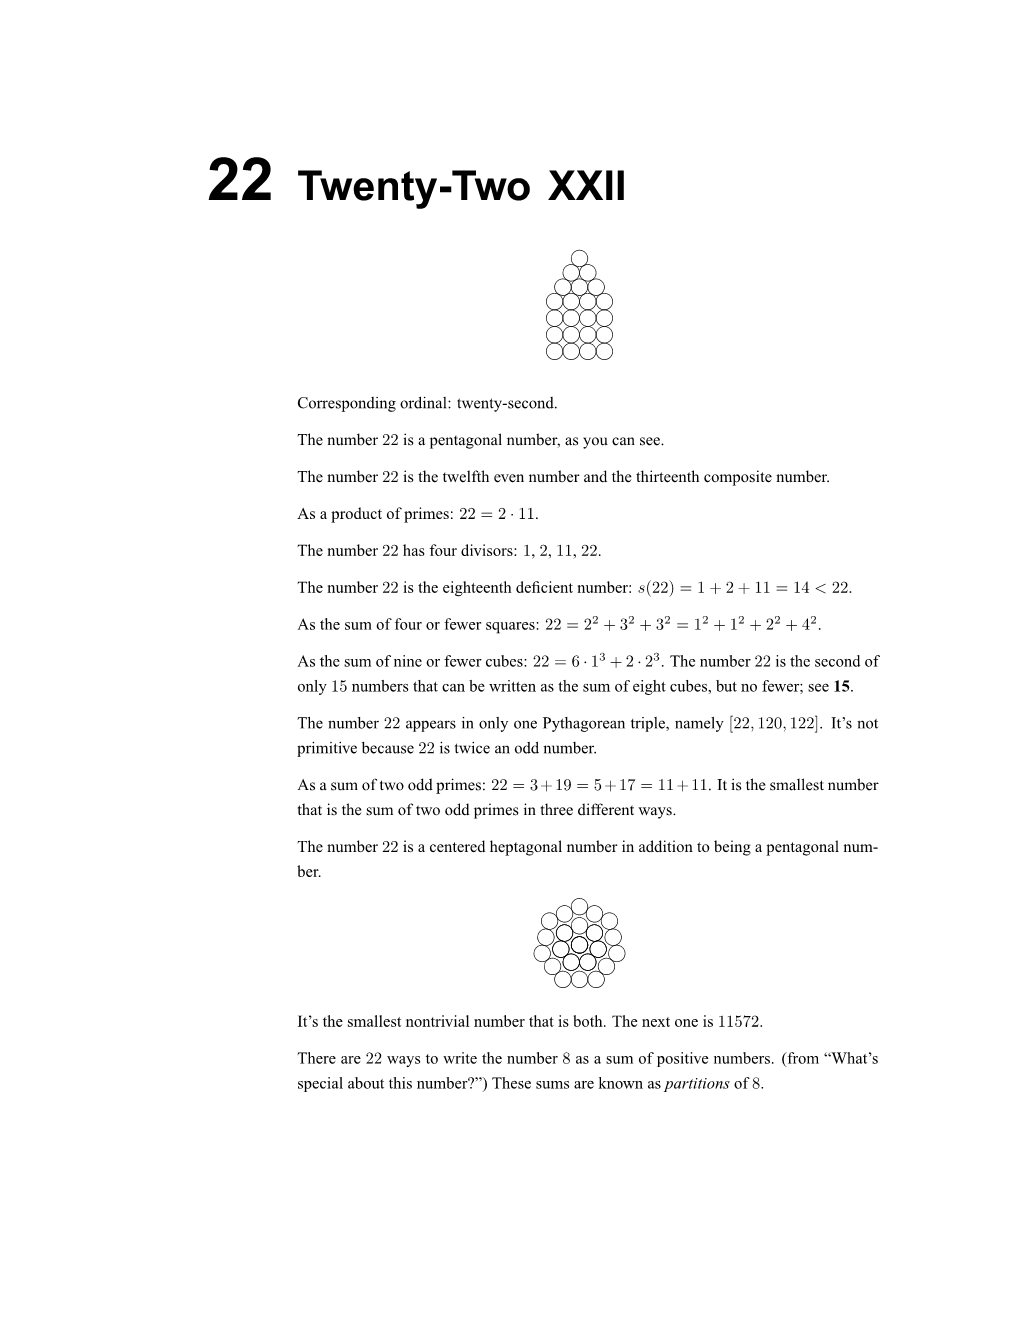 Number 22 Is a Pentagonal Number, As You Can See